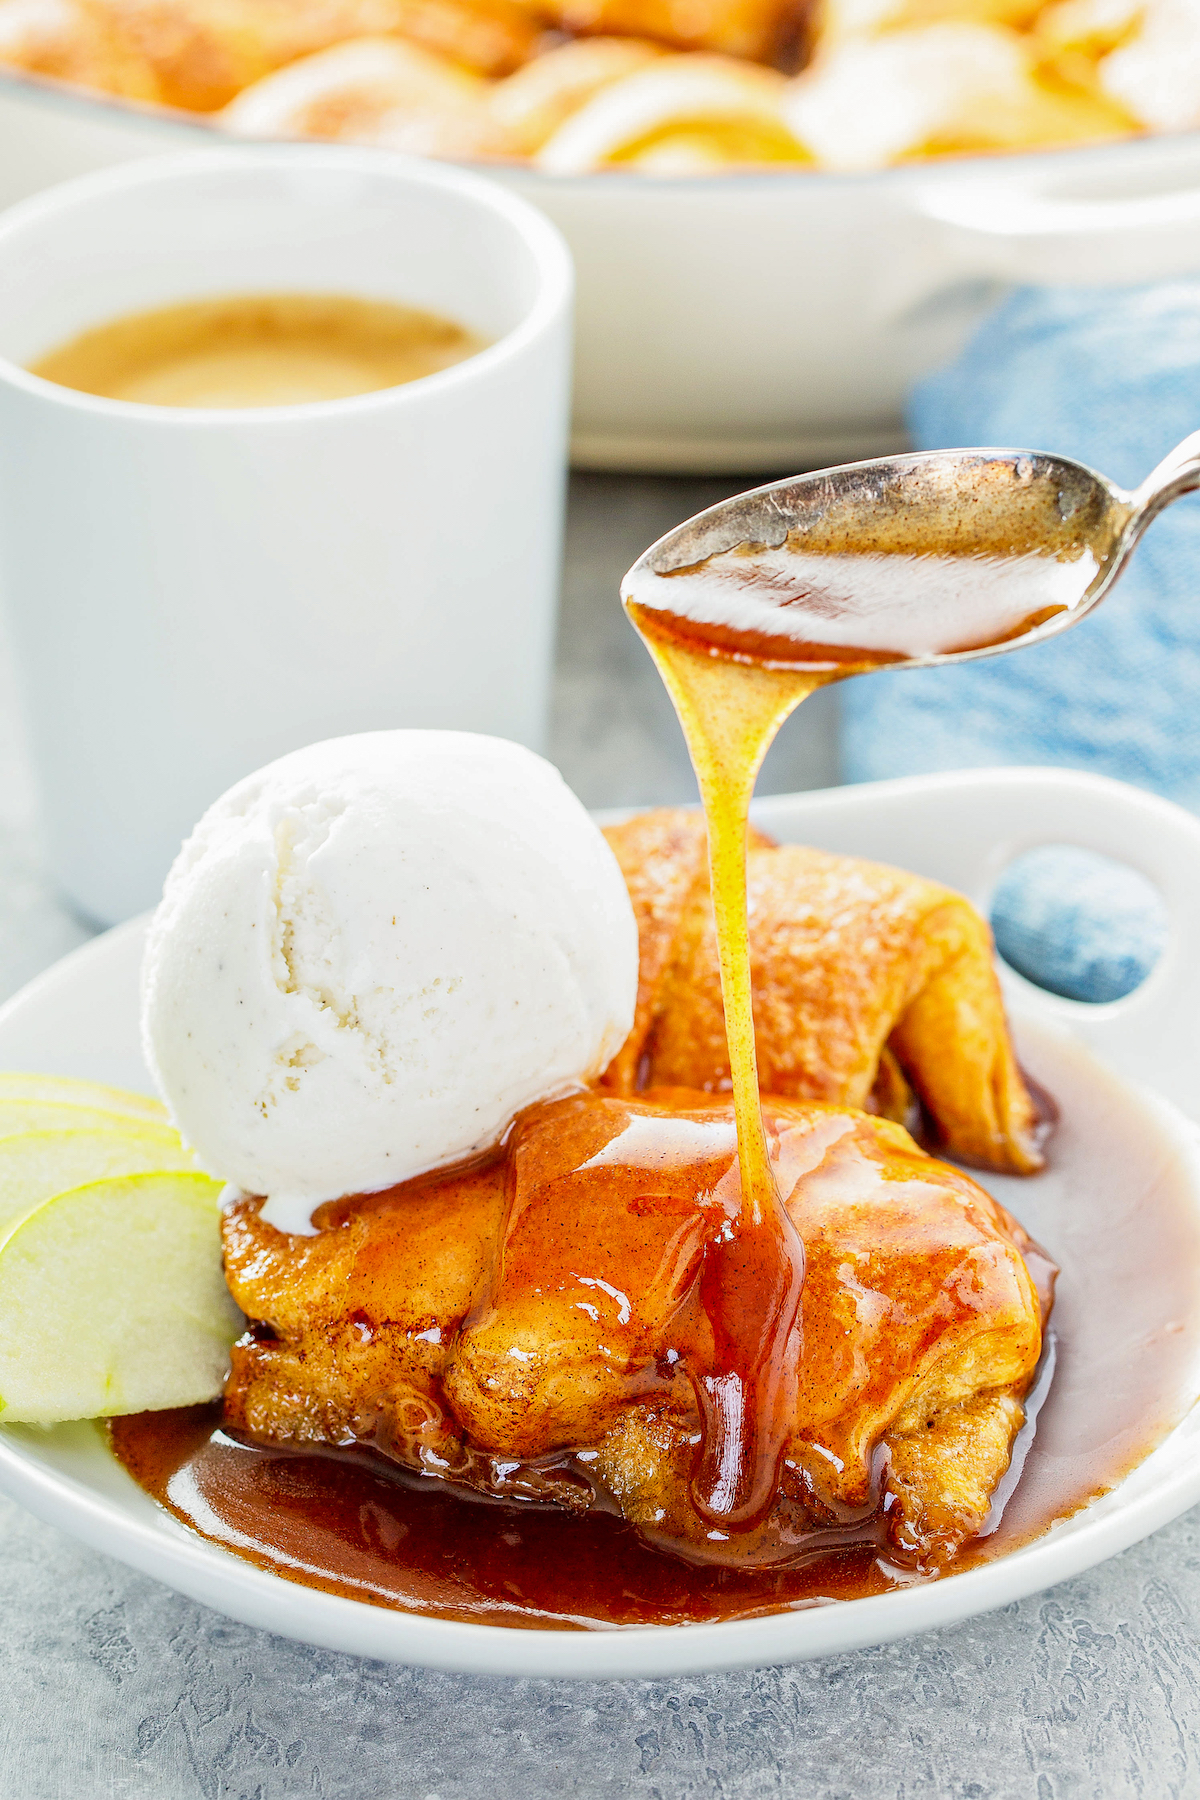 Sauce being drizzled over the top of an easy apple dumpling in a bowl with ice cream.